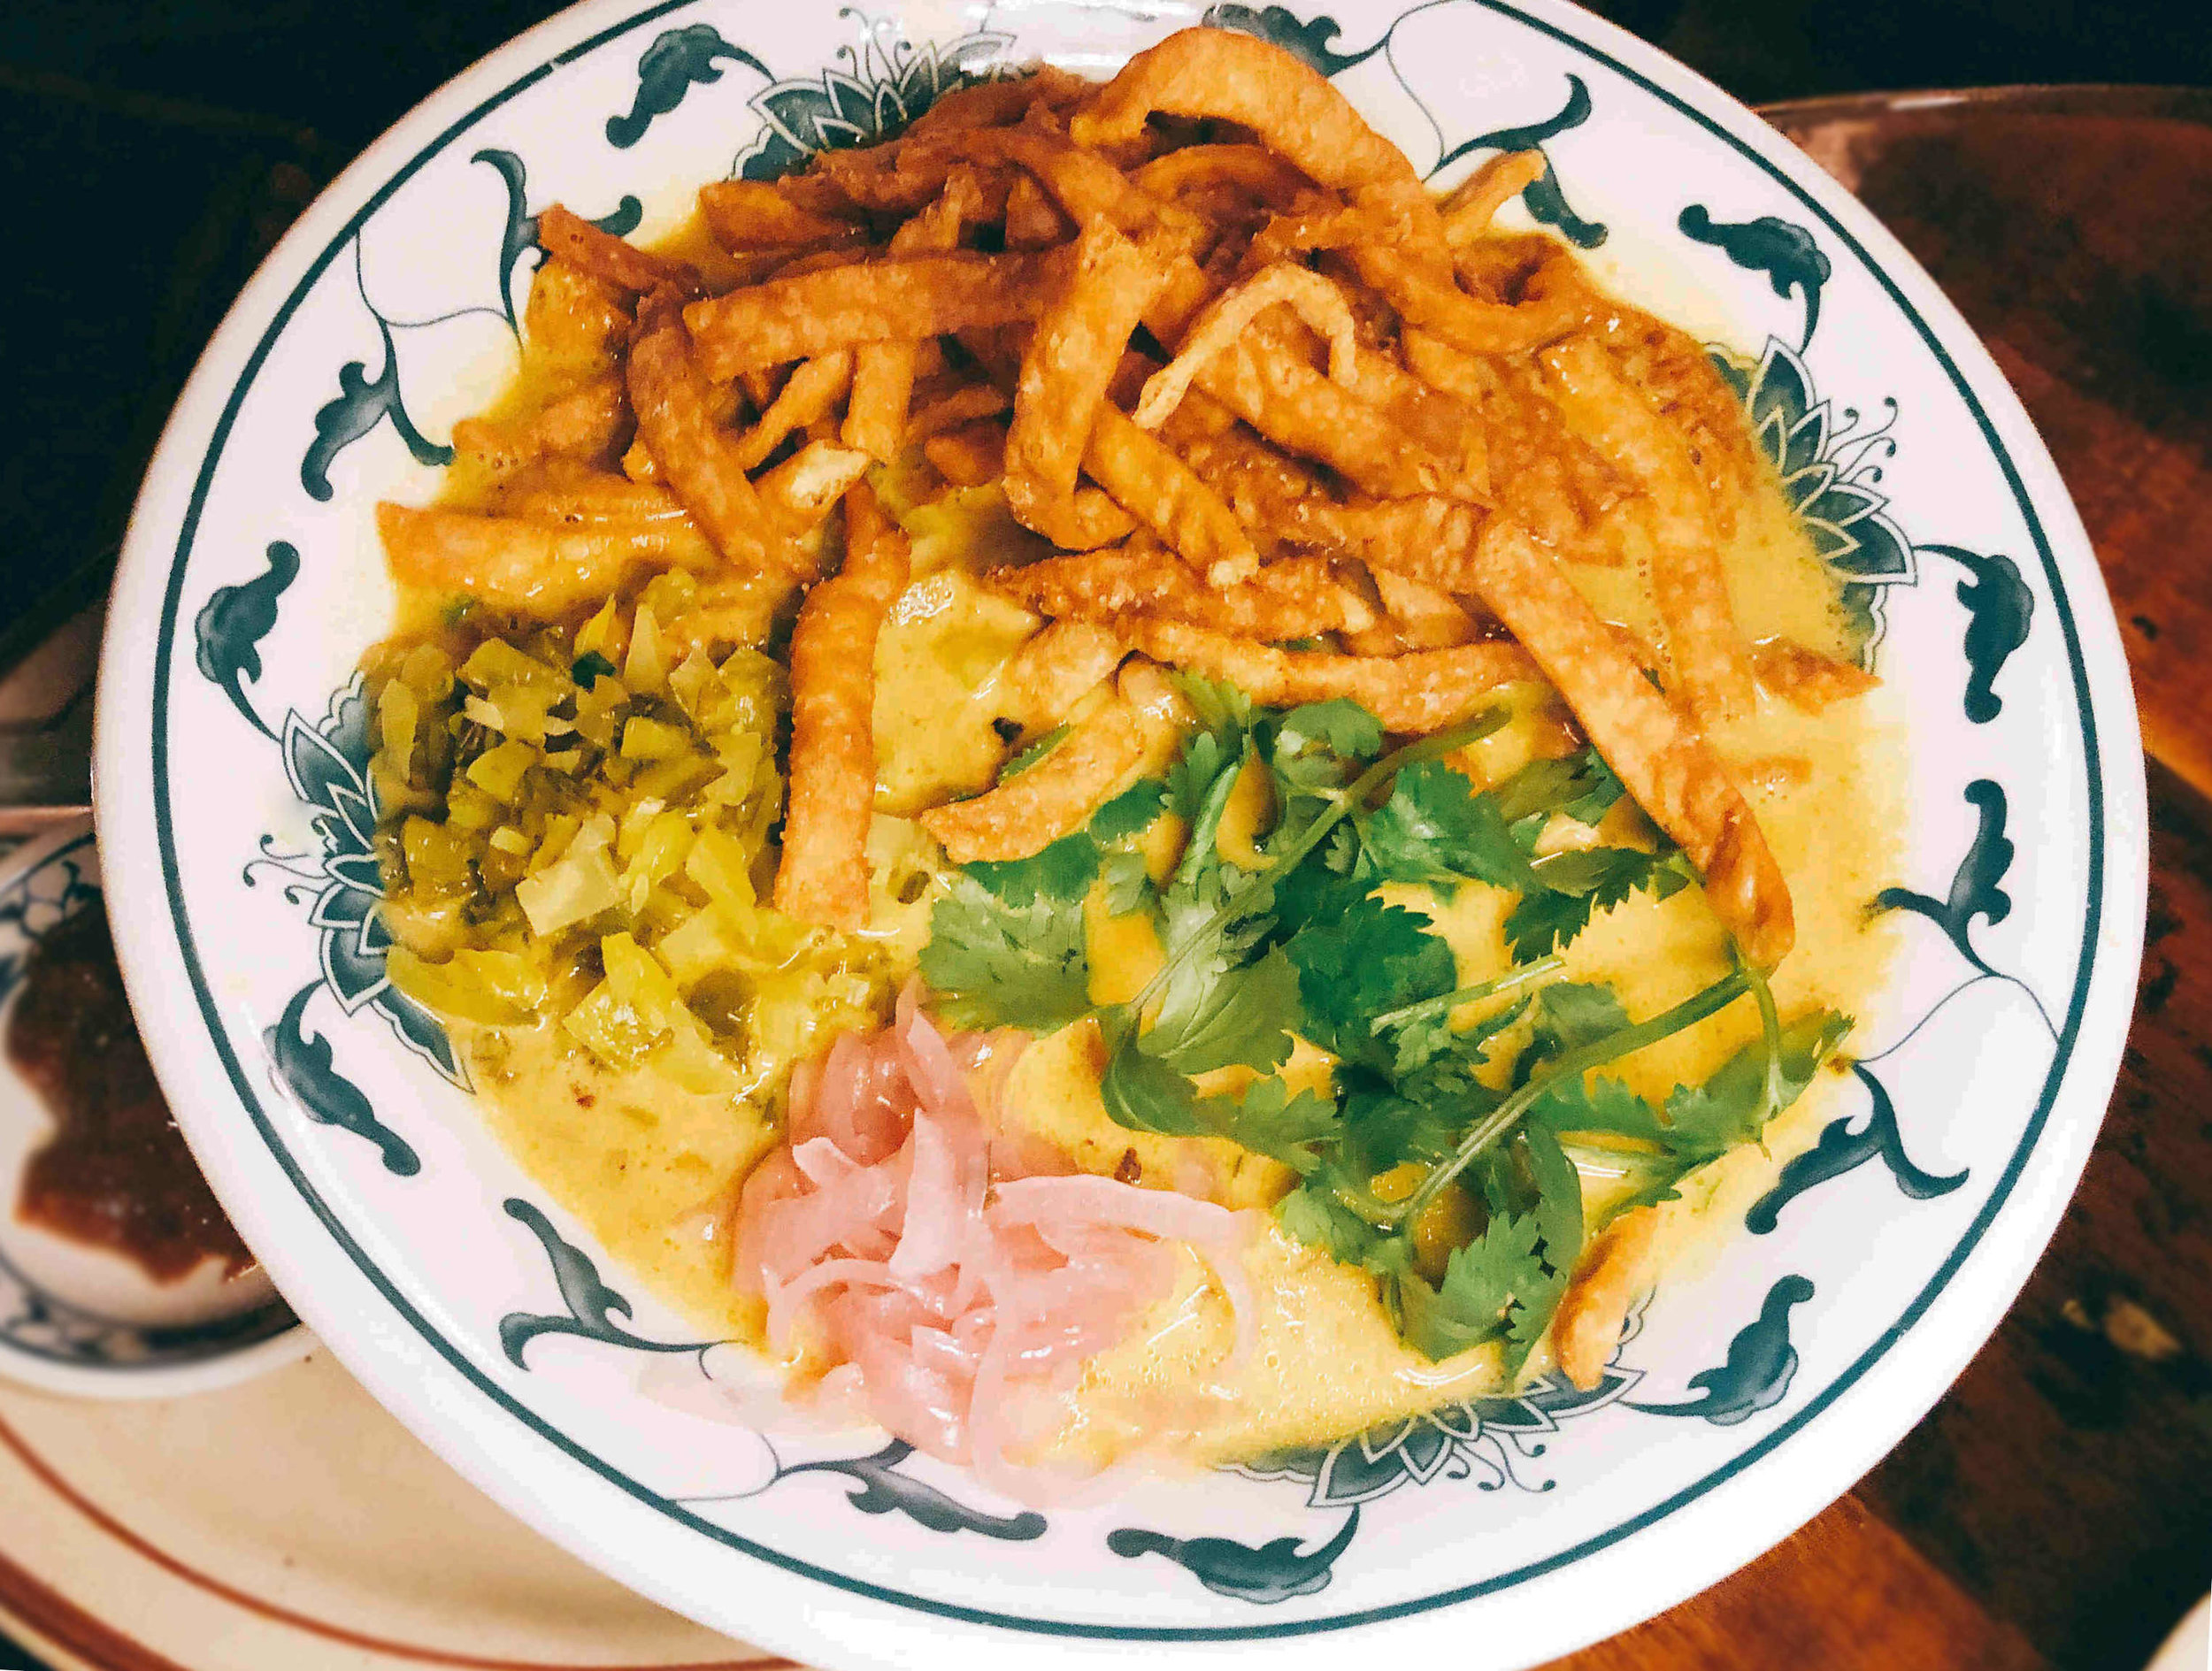 Northern style golden curry with homemade egg noodles